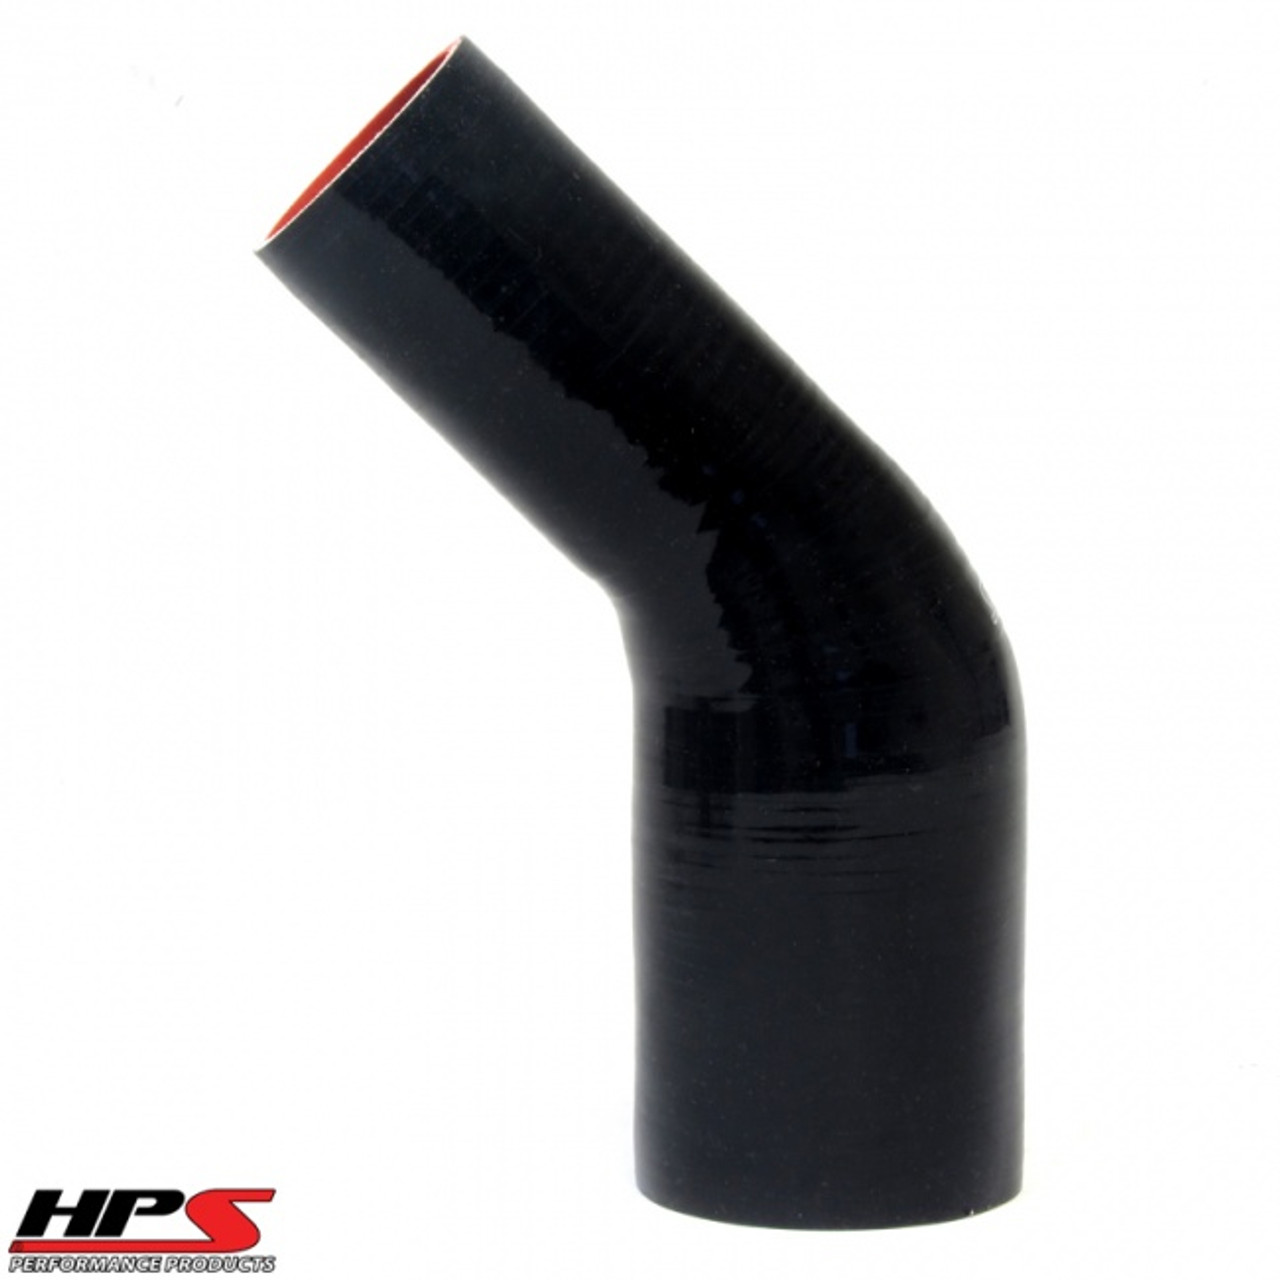 HPS 4 Ply Reinforced 45 Degree Silicone Hose Adapter 2.25" x 2.5" ID - Black